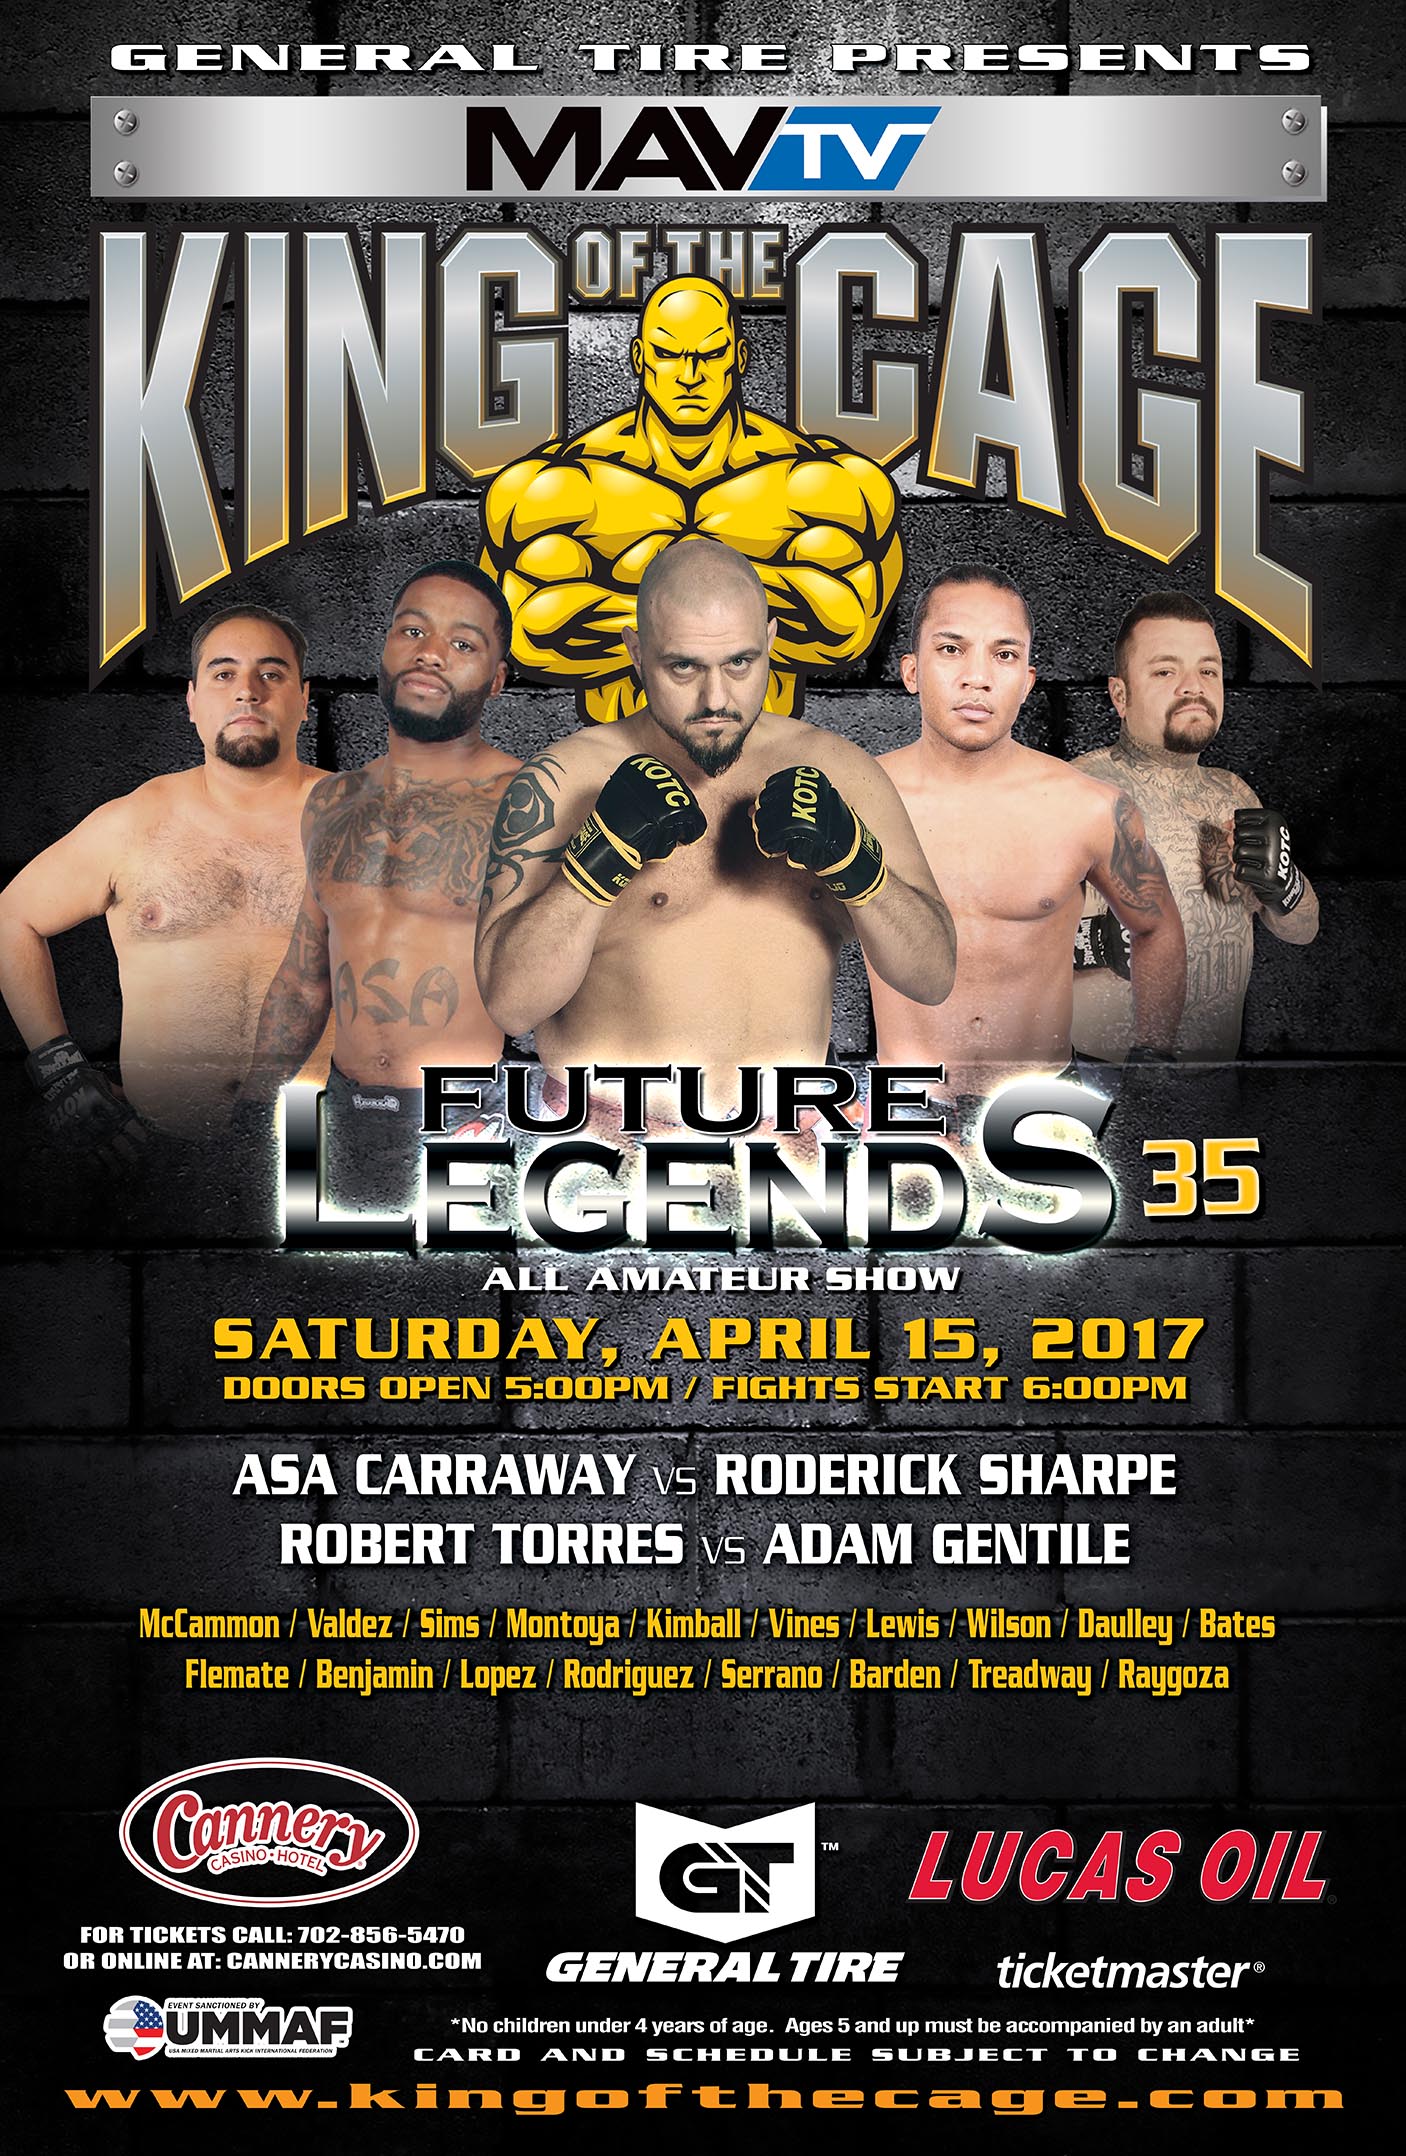 King of the Cage Returns to Cannery Casino Hotel on April 15 for “FUTURE LEGENDS 35”